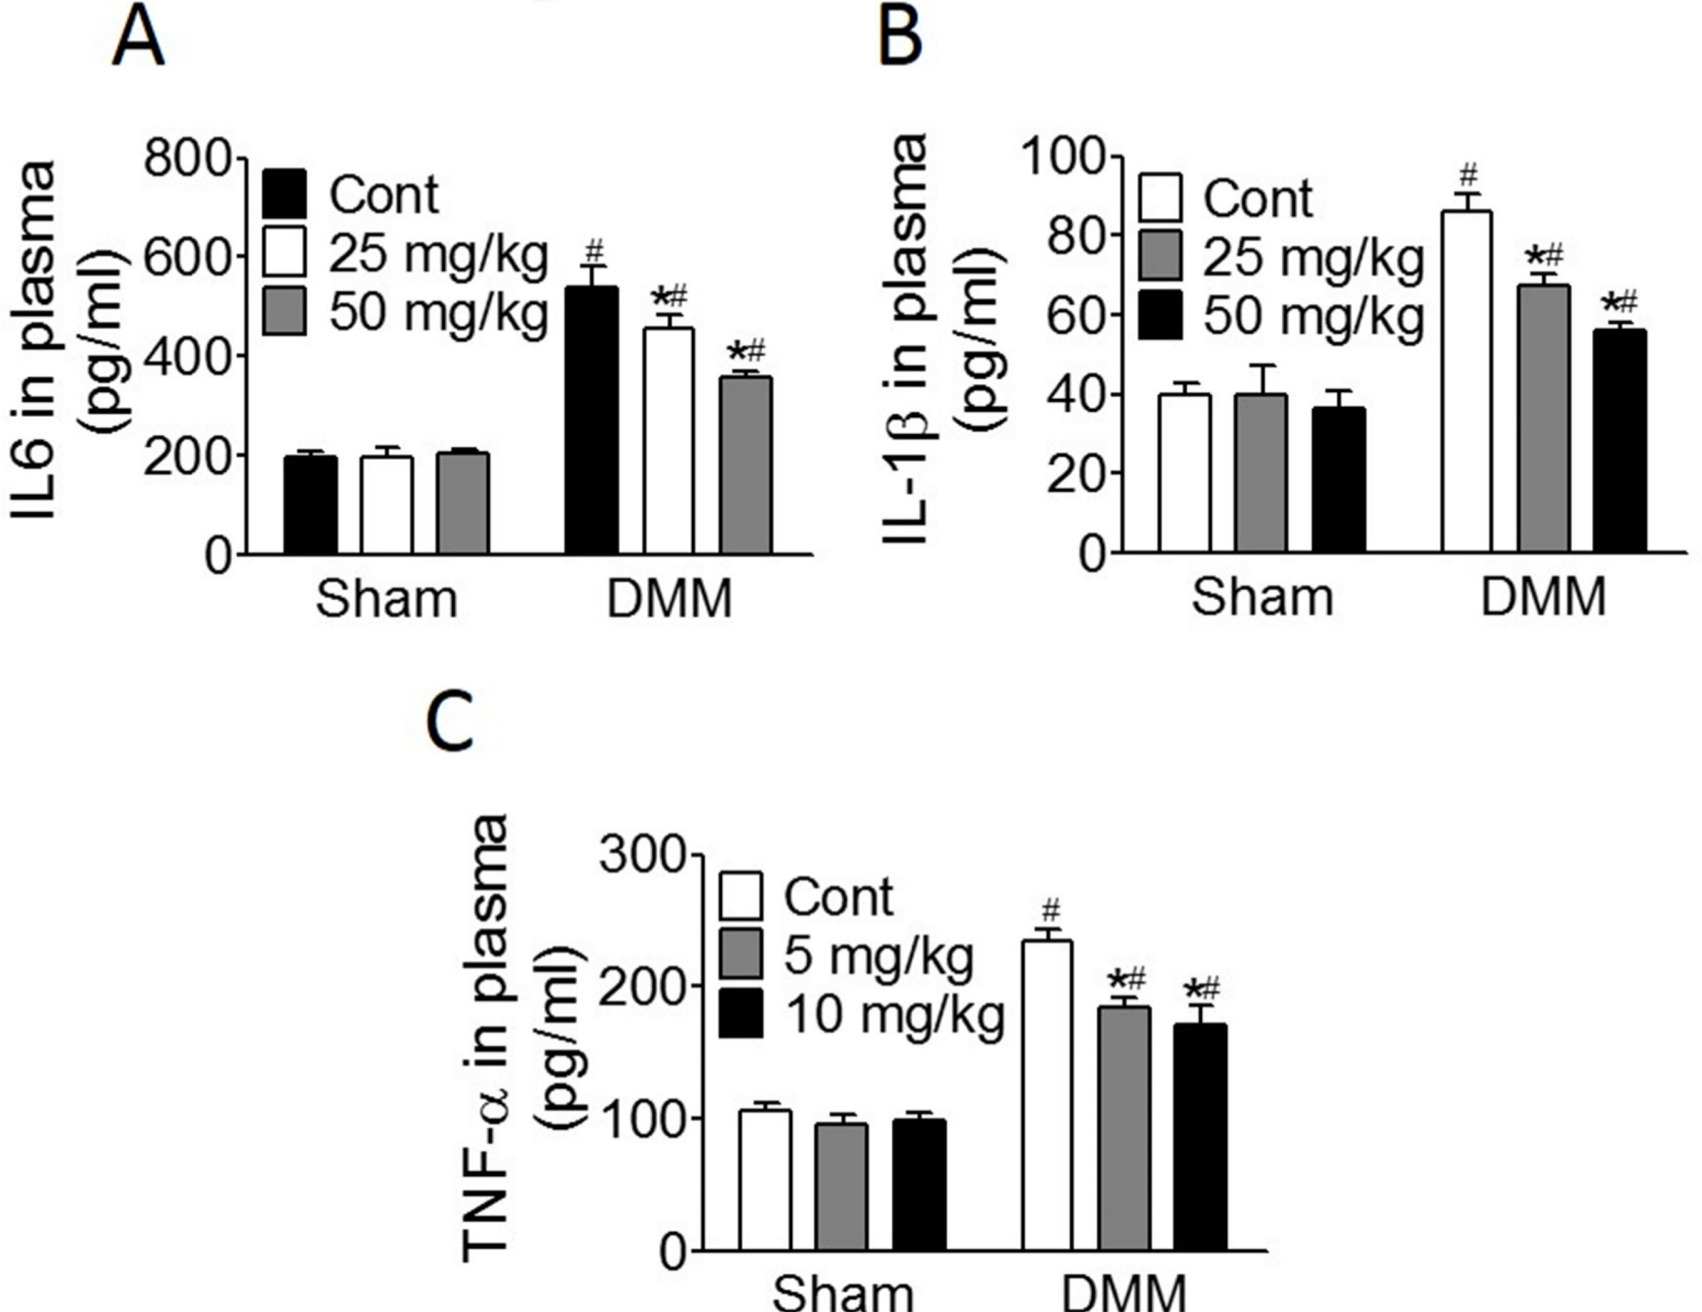 Fig. 3 
            Tert-butylhydroquinone (tBHQ) decreased destabilization of the medial meniscus (DMM)-induced inflammation in vivo. After DMM surgery for one week, mice were intraperitoneally injected with different concentrations of tBHQ (25 and 50 mg/kg) and maintained for eight weeks. The expression levels of a) interleukin 6 (IL-6), b) interleukin 1 beta (IL-1β), and c) tumour necrosis factor alpha (TNF-α) were detected by enzyme-linked immunosorbent assay (ELISA) assay. Difference among multiple groups was explored by one-way analysis of variance followed by a post hoc test. N = 6 in each group. *p < 0.05 vs DMM-control group, #p < 0.05 vs Sham group with the same tBHQ treatment.
          